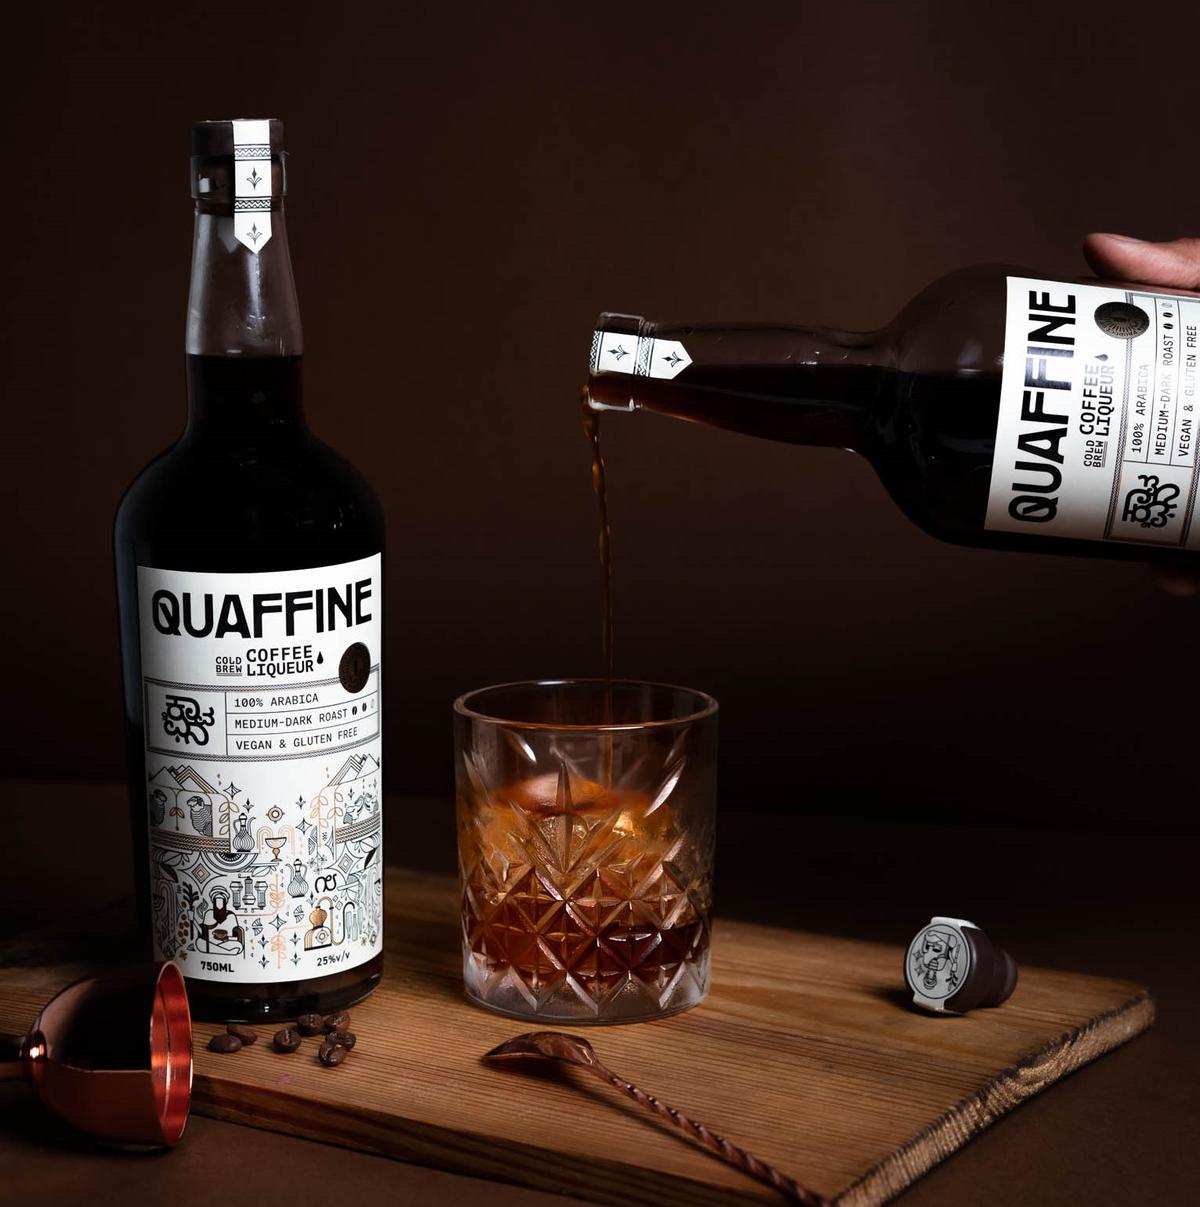 Quaffine, a cold brew coffee liqueur from India